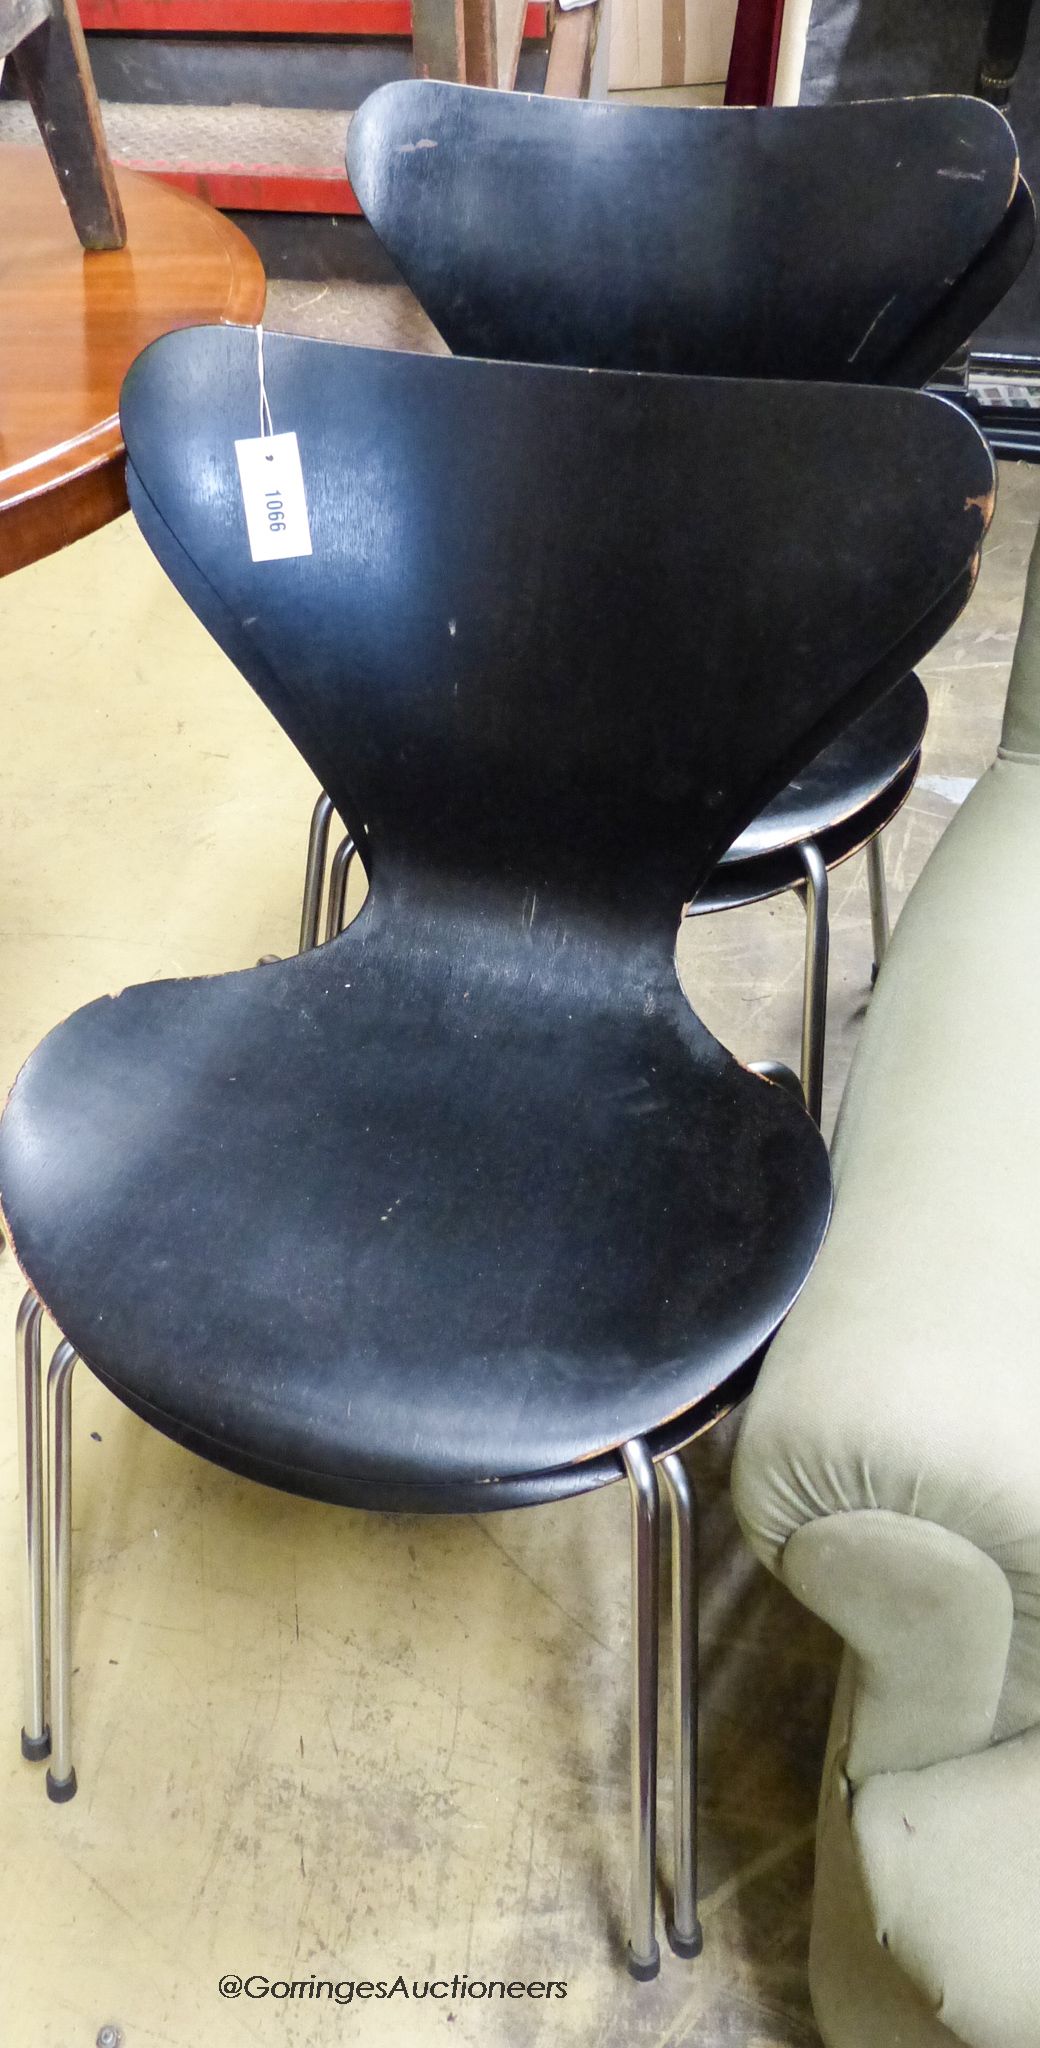 A set of four Arne Jacobsen chairs